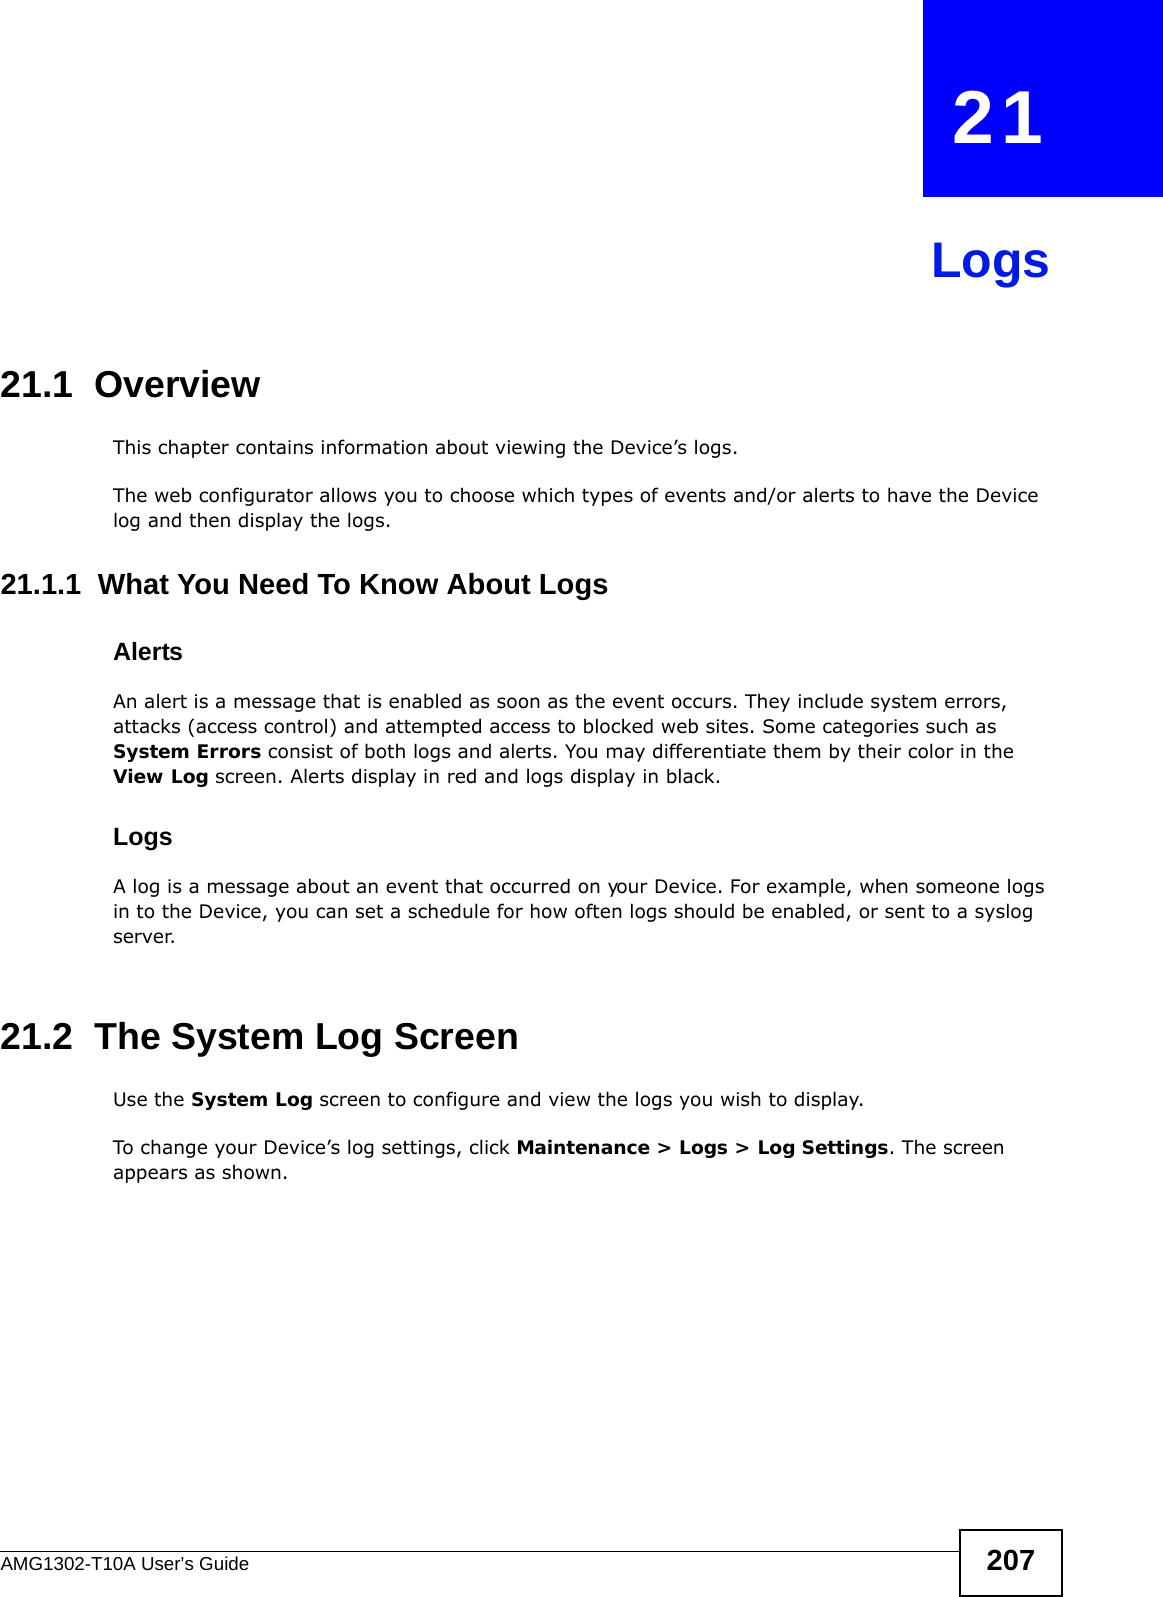 AMG1302-T10A User’s Guide 207CHAPTER   21Logs21.1  OverviewThis chapter contains information about viewing the Device’s logs.The web configurator allows you to choose which types of events and/or alerts to have the Device log and then display the logs. 21.1.1  What You Need To Know About LogsAlertsAn alert is a message that is enabled as soon as the event occurs. They include system errors, attacks (access control) and attempted access to blocked web sites. Some categories such as System Errors consist of both logs and alerts. You may differentiate them by their color in the View Log screen. Alerts display in red and logs display in black.LogsA log is a message about an event that occurred on your Device. For example, when someone logs in to the Device, you can set a schedule for how often logs should be enabled, or sent to a syslog server.21.2  The System Log ScreenUse the System Log screen to configure and view the logs you wish to display.To change your Device’s log settings, click Maintenance &gt; Logs &gt; Log Settings. The screen appears as shown.